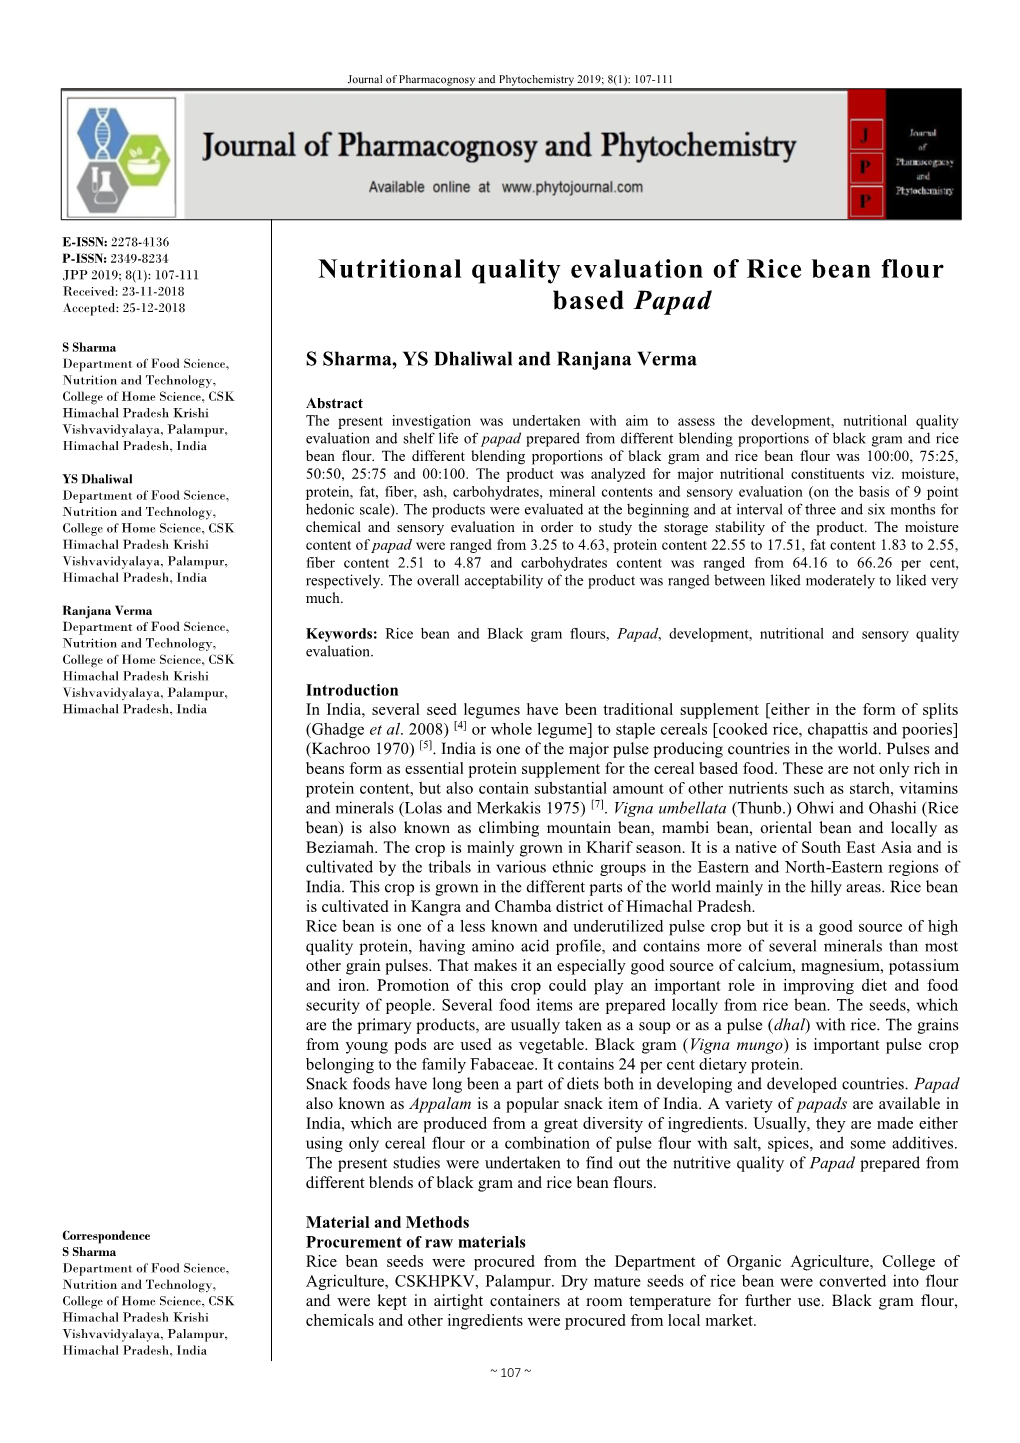 Nutritional Quality Evaluation of Rice Bean Flour Based Papad